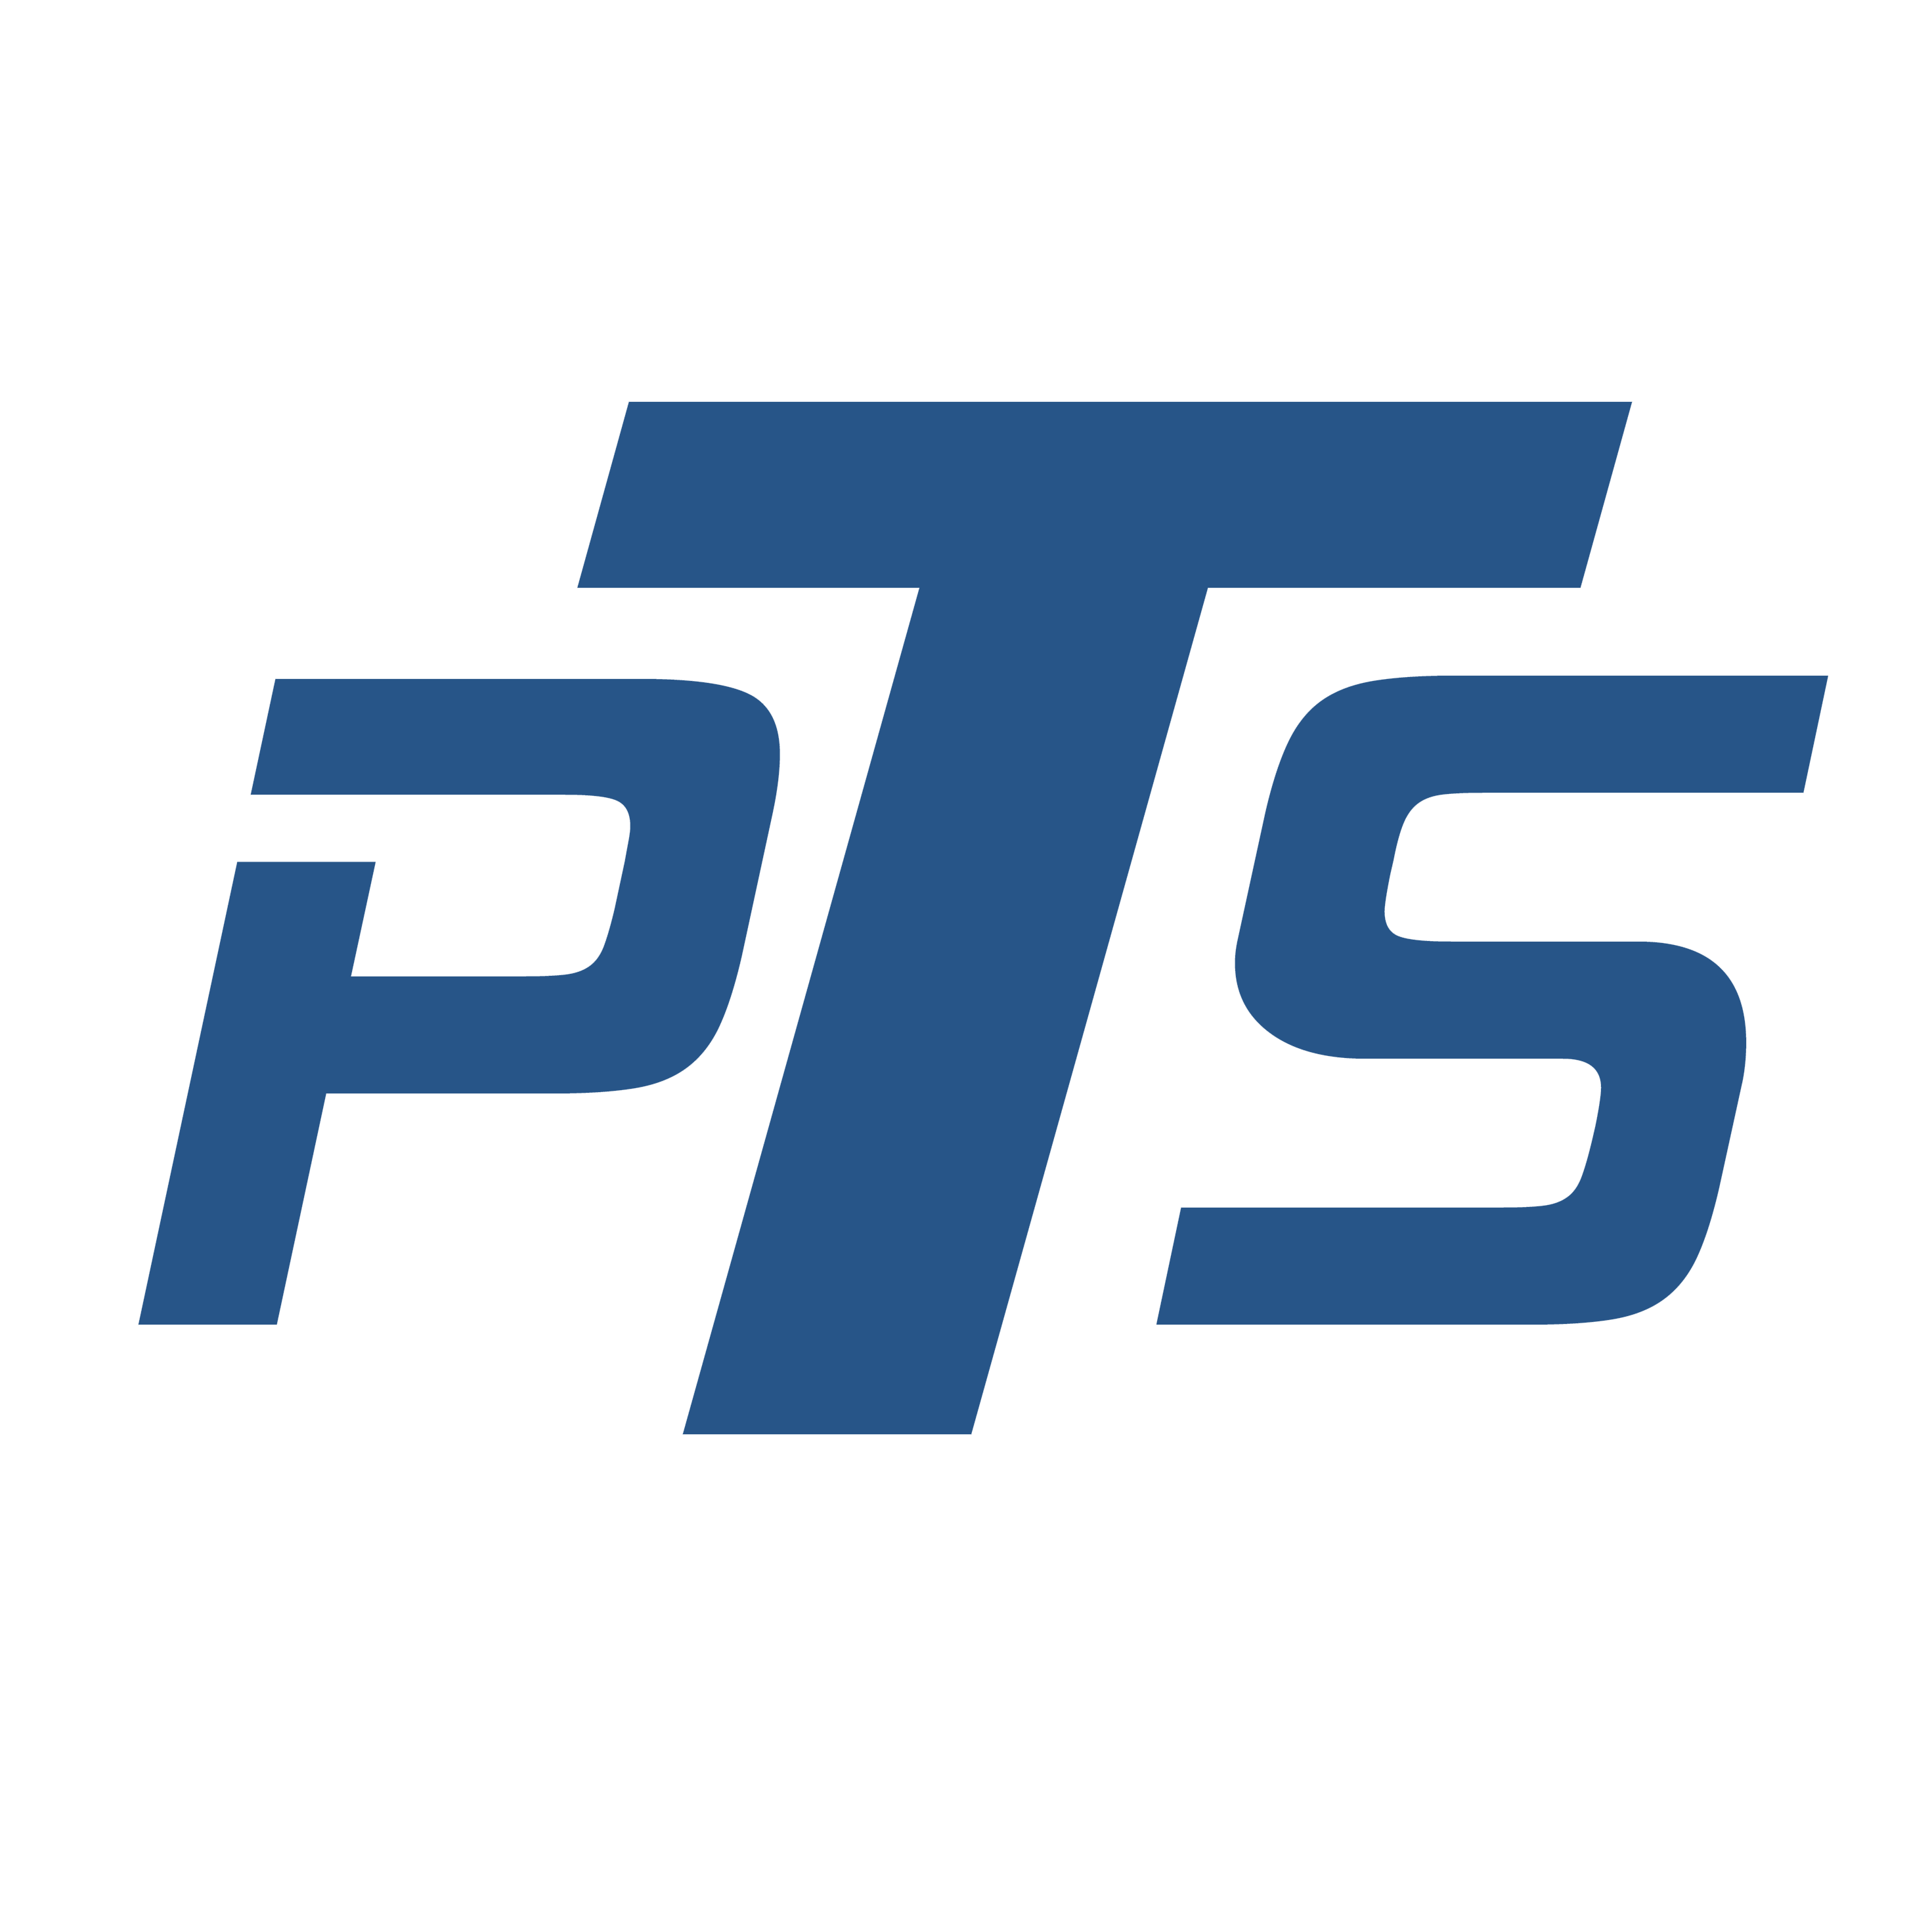 Modern, Professional, It Company Logo Design for PTS Group by Dream Logo  Design | Design #13547853